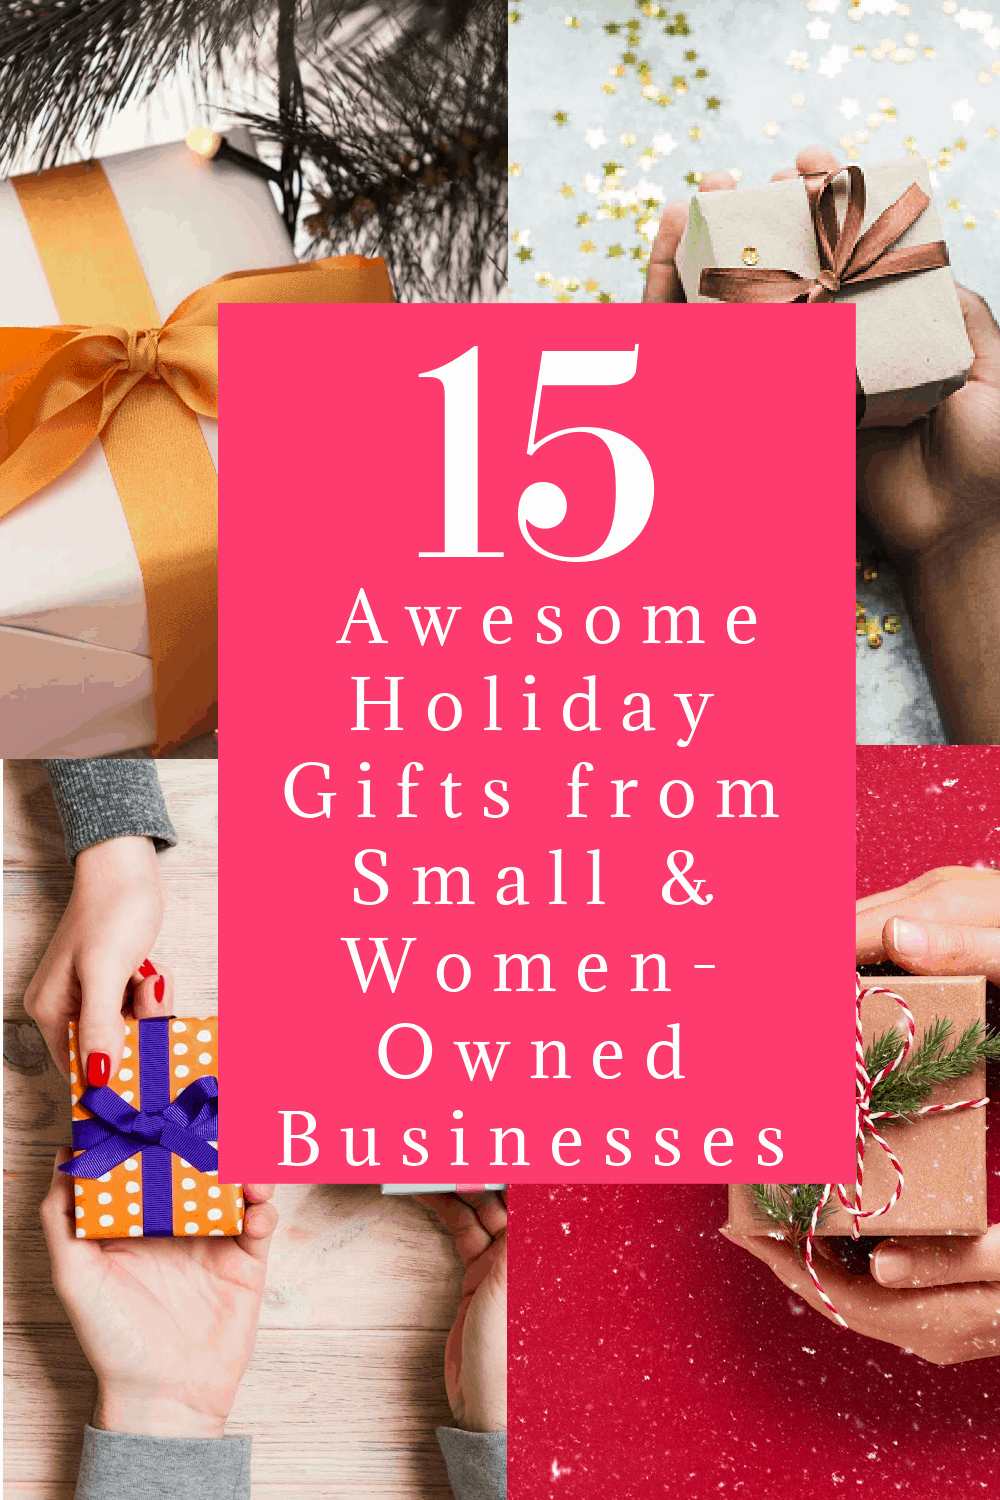 16 Awesome Holiday Gifts From Small & Women-Owned Businesses